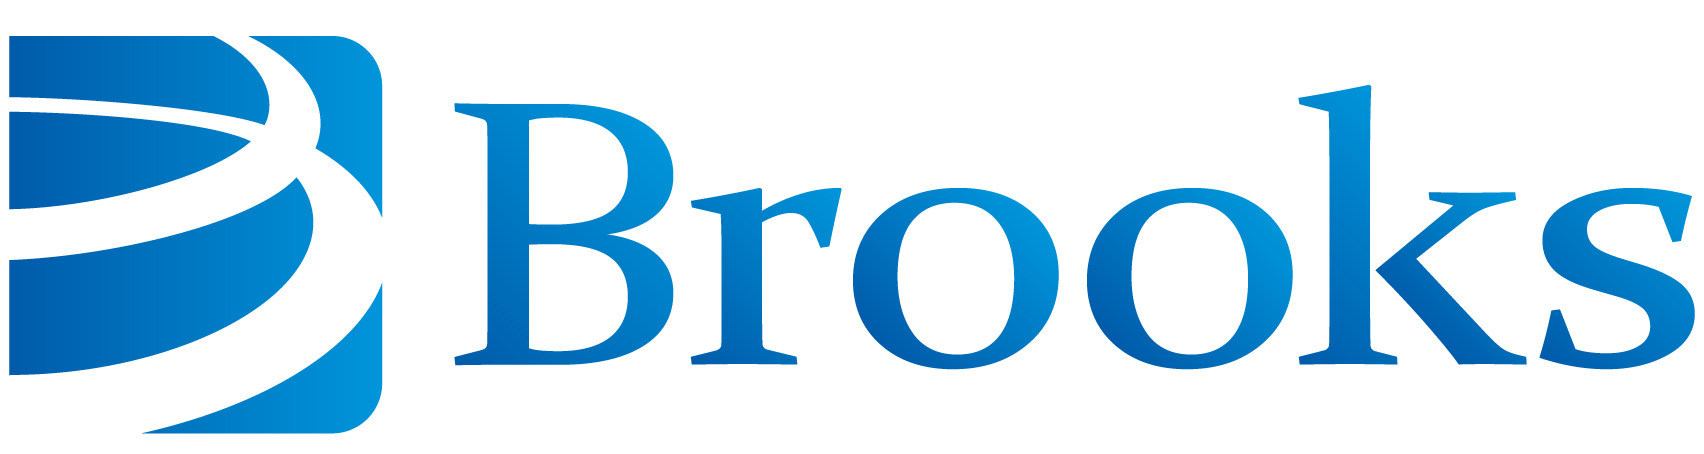 Brooks Automation Reports Fourth Quarter and Year-End Results of Fiscal Year 2019, Ended September 30, 2019, and Announces Quarterly Cash Dividend